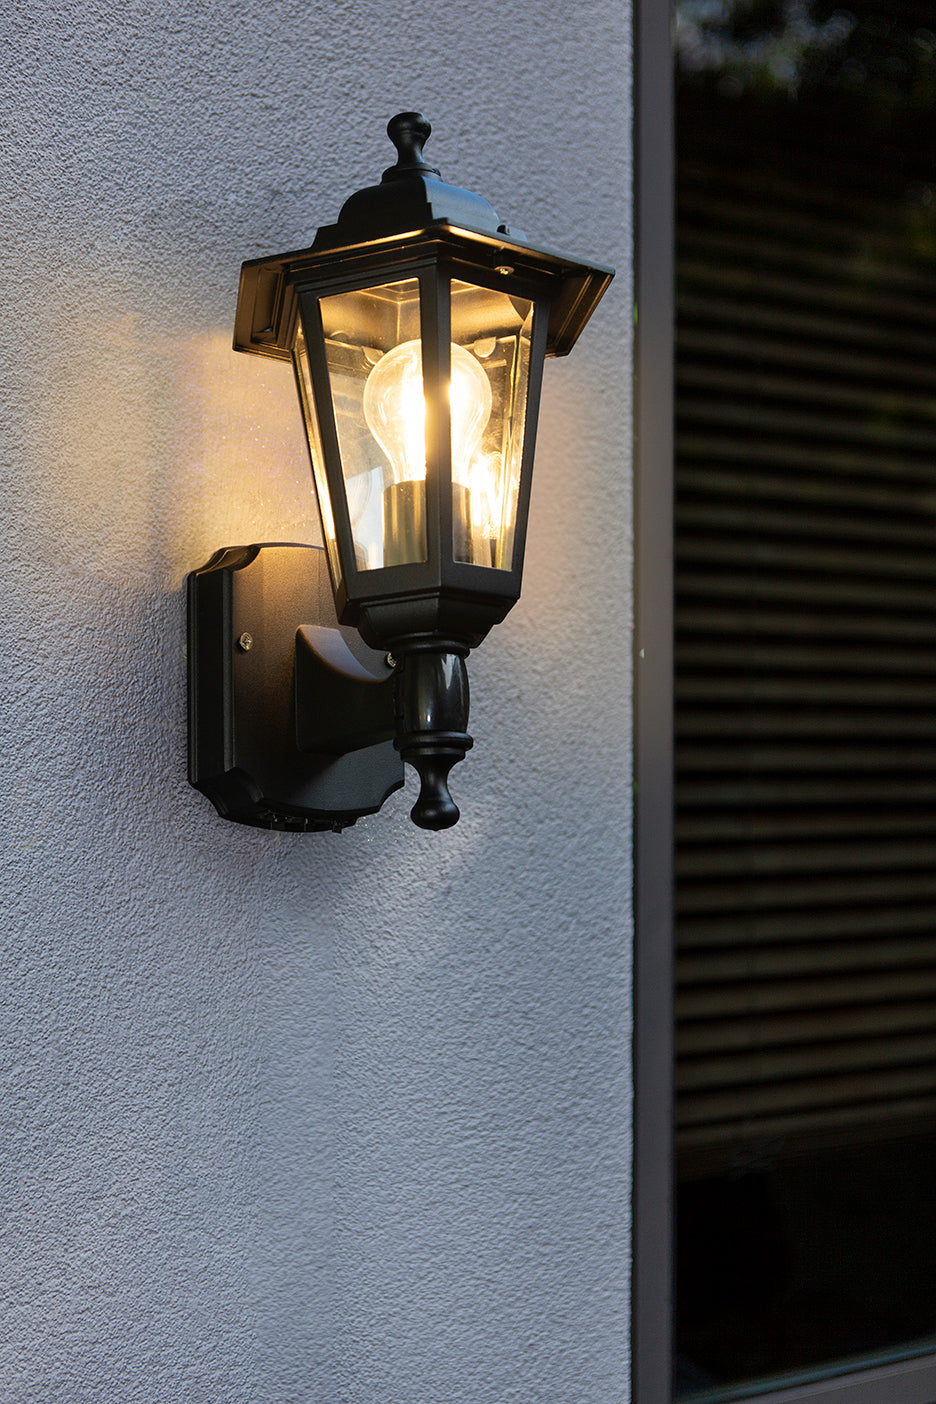 LUTEC-Motion Sensor Outdoor Wall Light, Dusk to dawn, Waterproof Metal, with Clear Glass(Bulb Not Included), Black